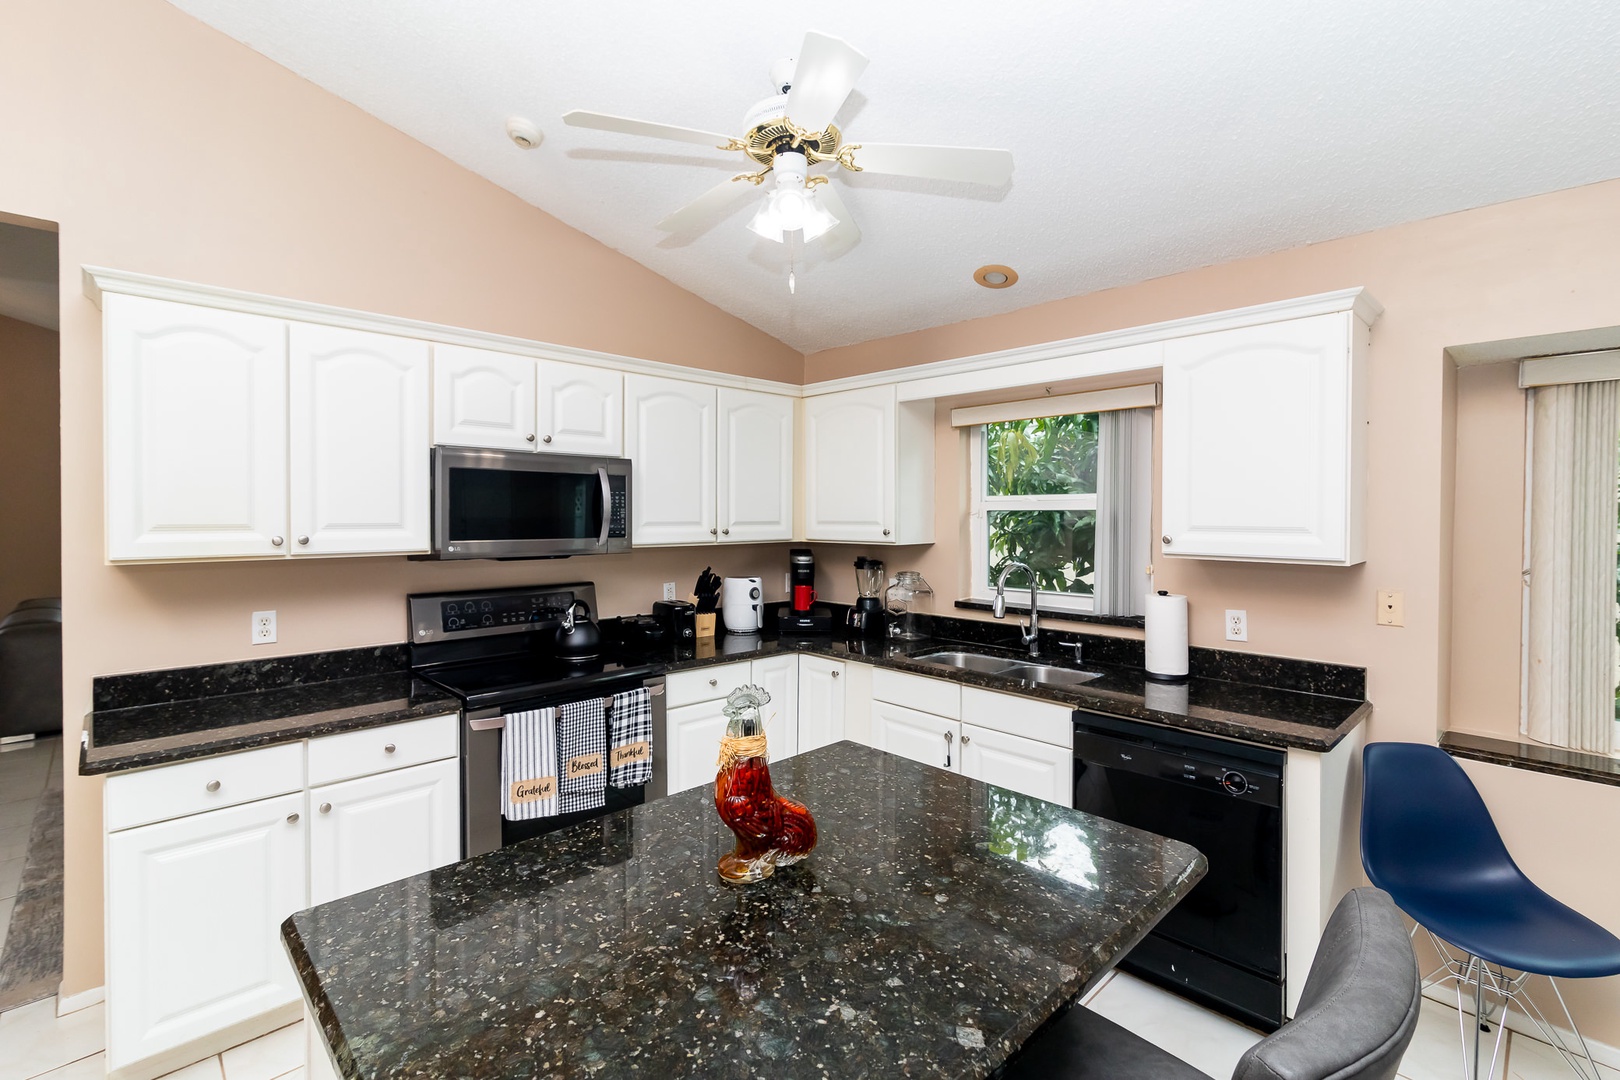 Fully equipped kitchen with dishwasher and electric stove